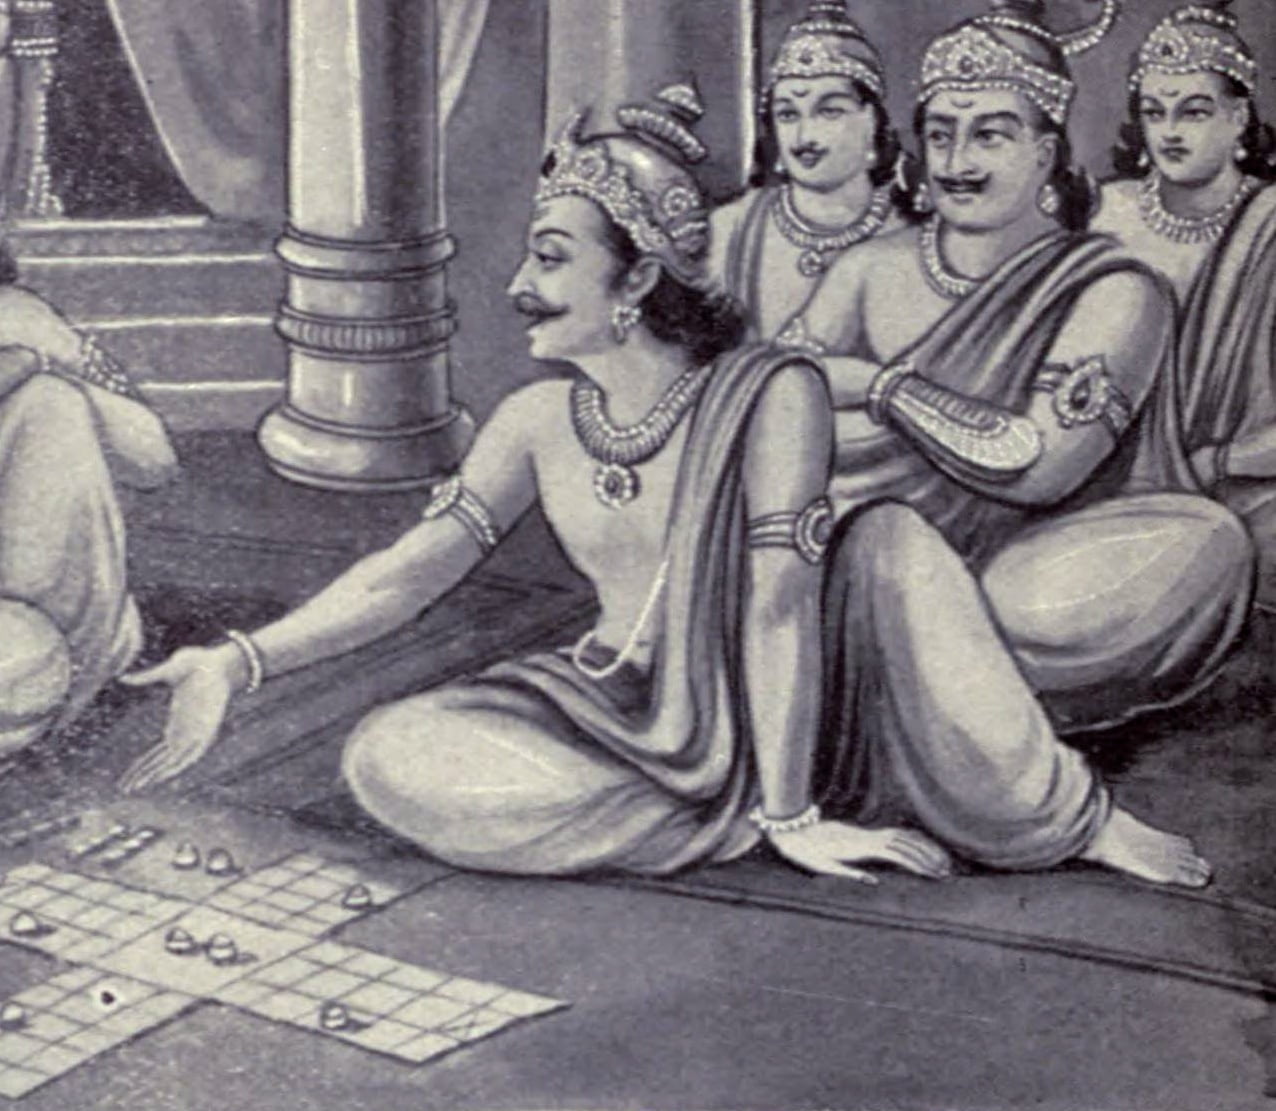 Yudhishthira and his brothers playing the game of dice